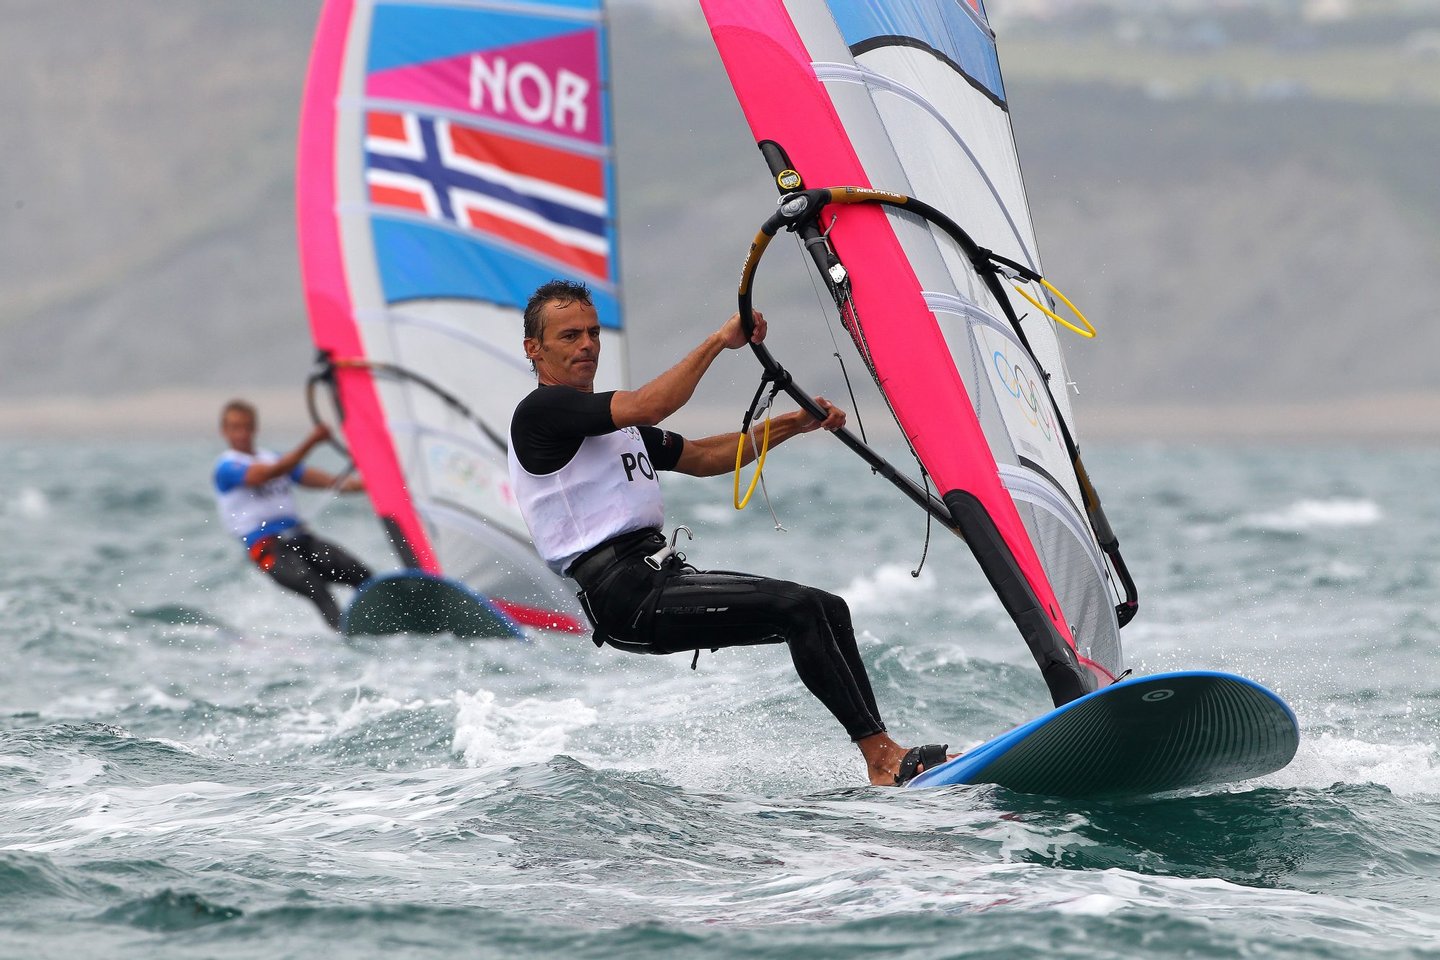 WEYMOUTH, ENGLAND - JULY 31: Joao Rodrigues of Portugal competes in the Men's RS:X Sailing on Day 4 of the London 2012 Olympic Games at the Weymouth & Portland Venue at Weymouth Harbour on July 31, 2012 in Weymouth, England. (Photo by Richard Langdon/Getty Images)